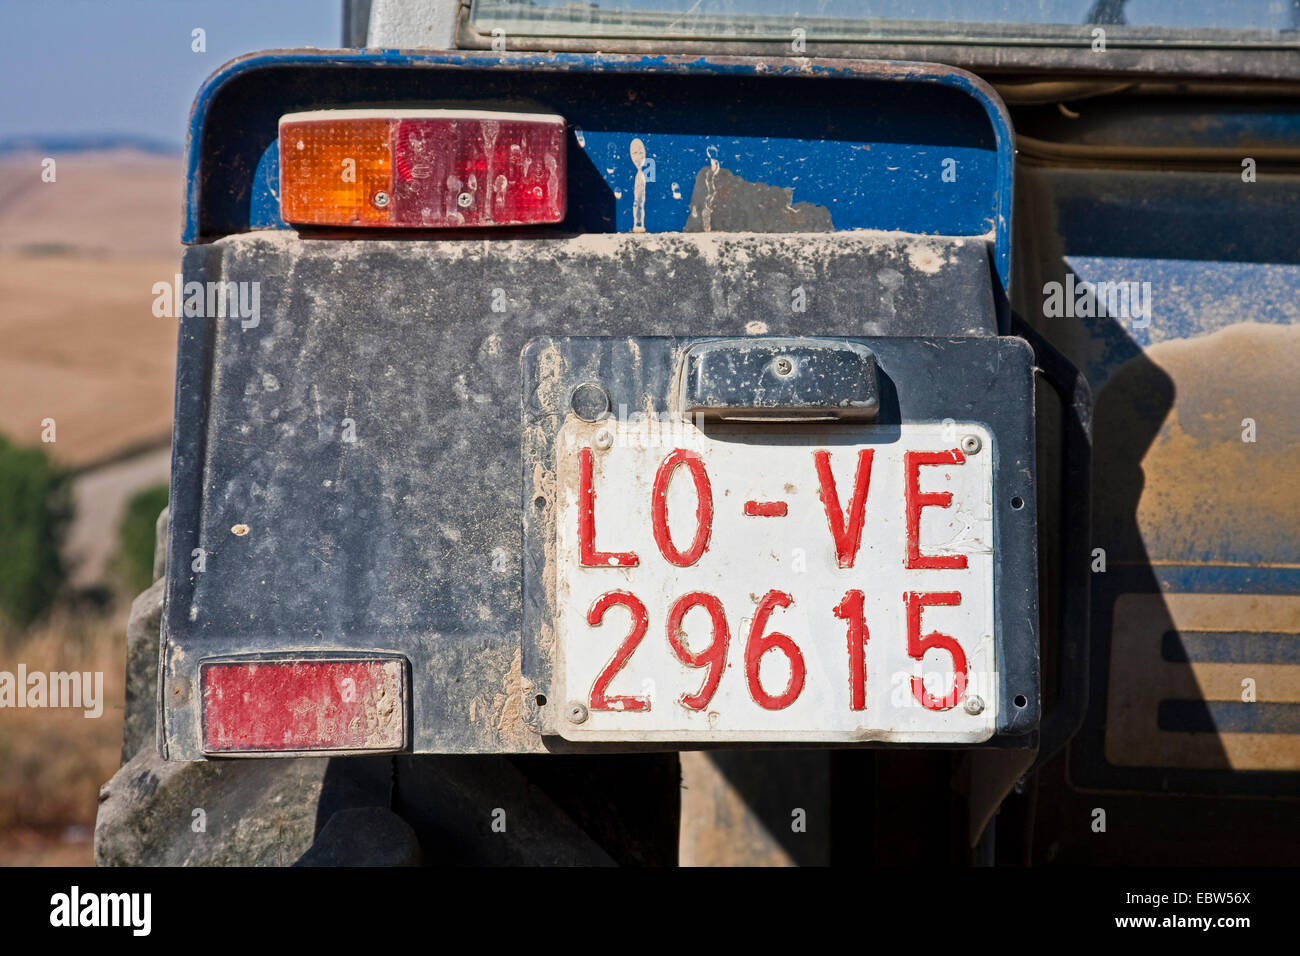 registration plate at a vehicle in Gra±¾n with the writing 'LOVE', Spain, Basque country, La Rioja, Navarra Stock Photo